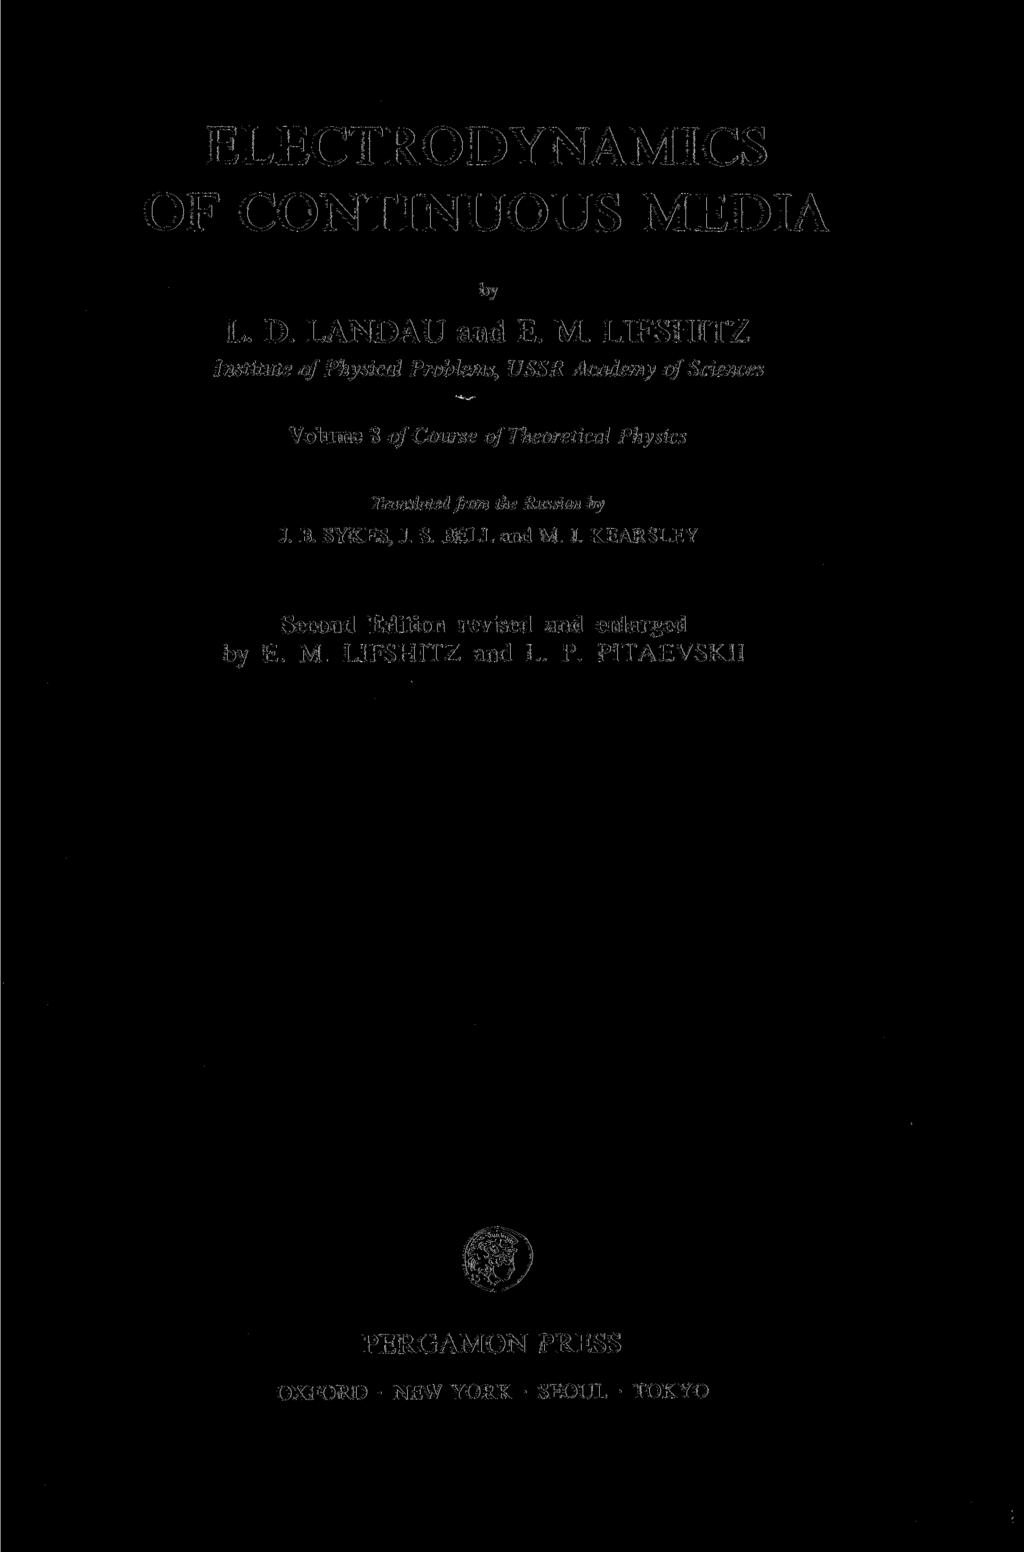 ELECTRODYNAMICS OF CONTINUOUS MEDIA by L. D. LANDAU and E. M. LIFSHITZ Institute of Physical Problems, USSR Academy of Sciences Volume 8 of Course of Theoretical Physics Translated from the Russian by J.